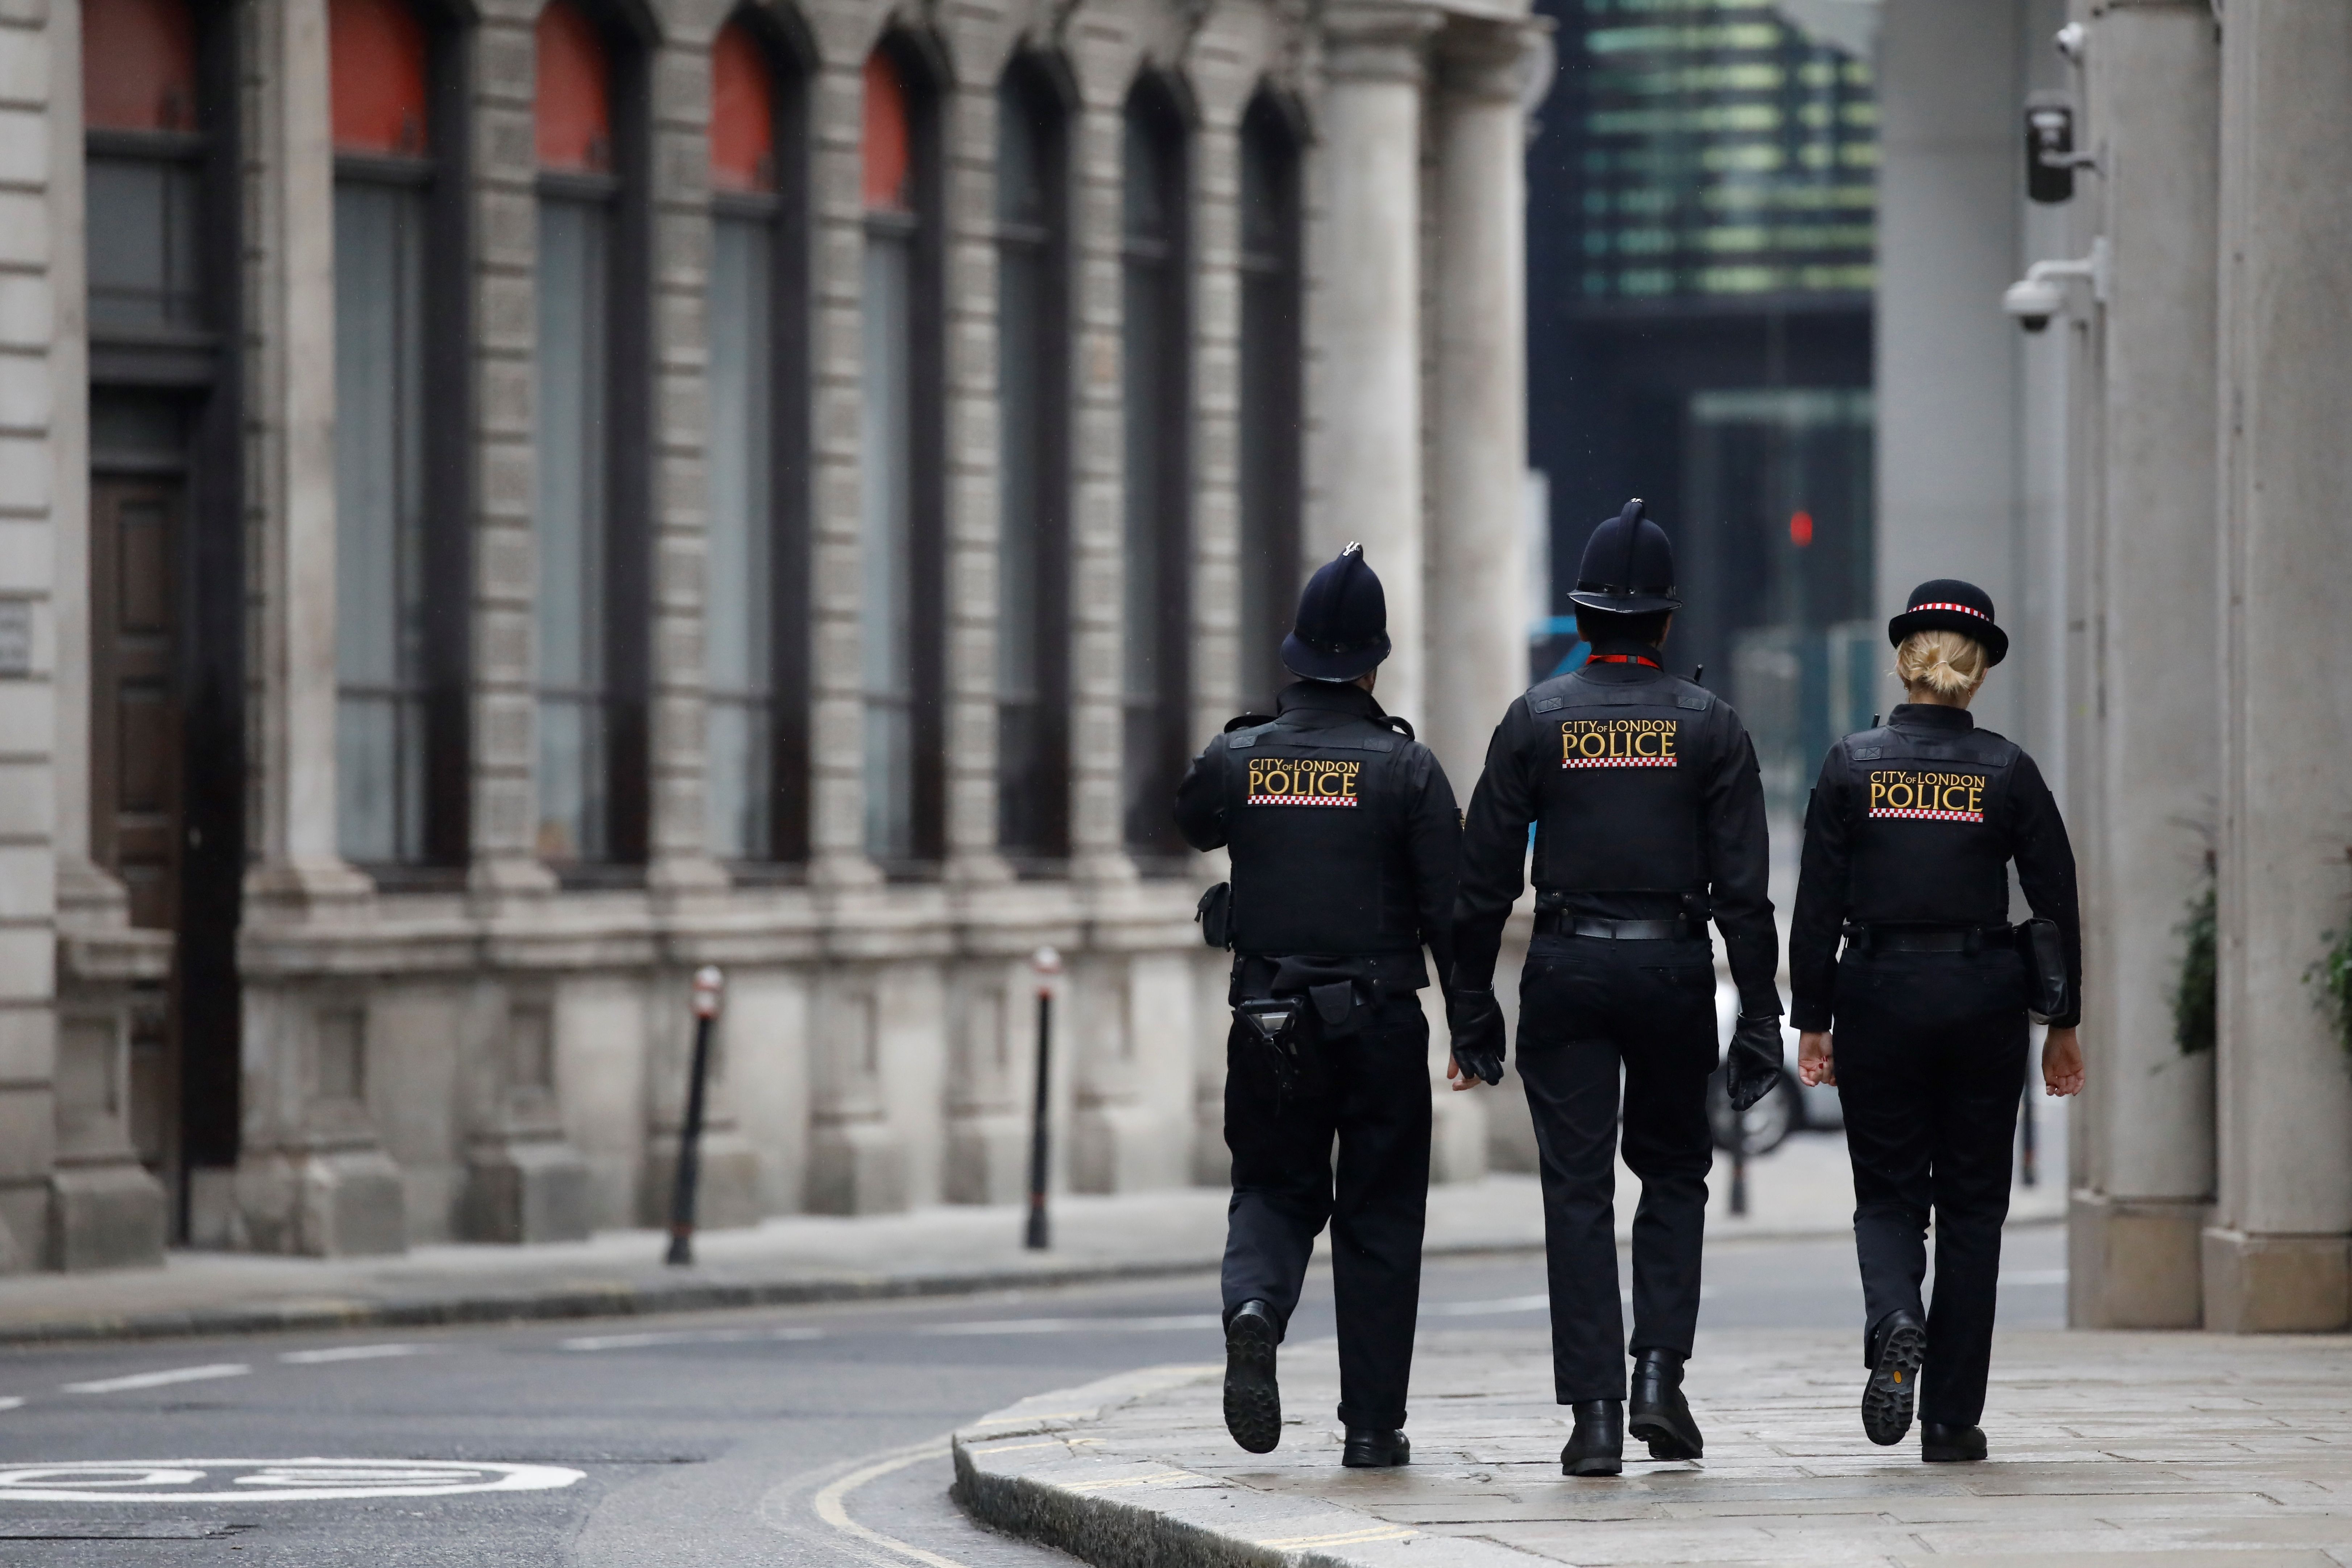 Police officers patrol the near-deserted streets in London on April 16.